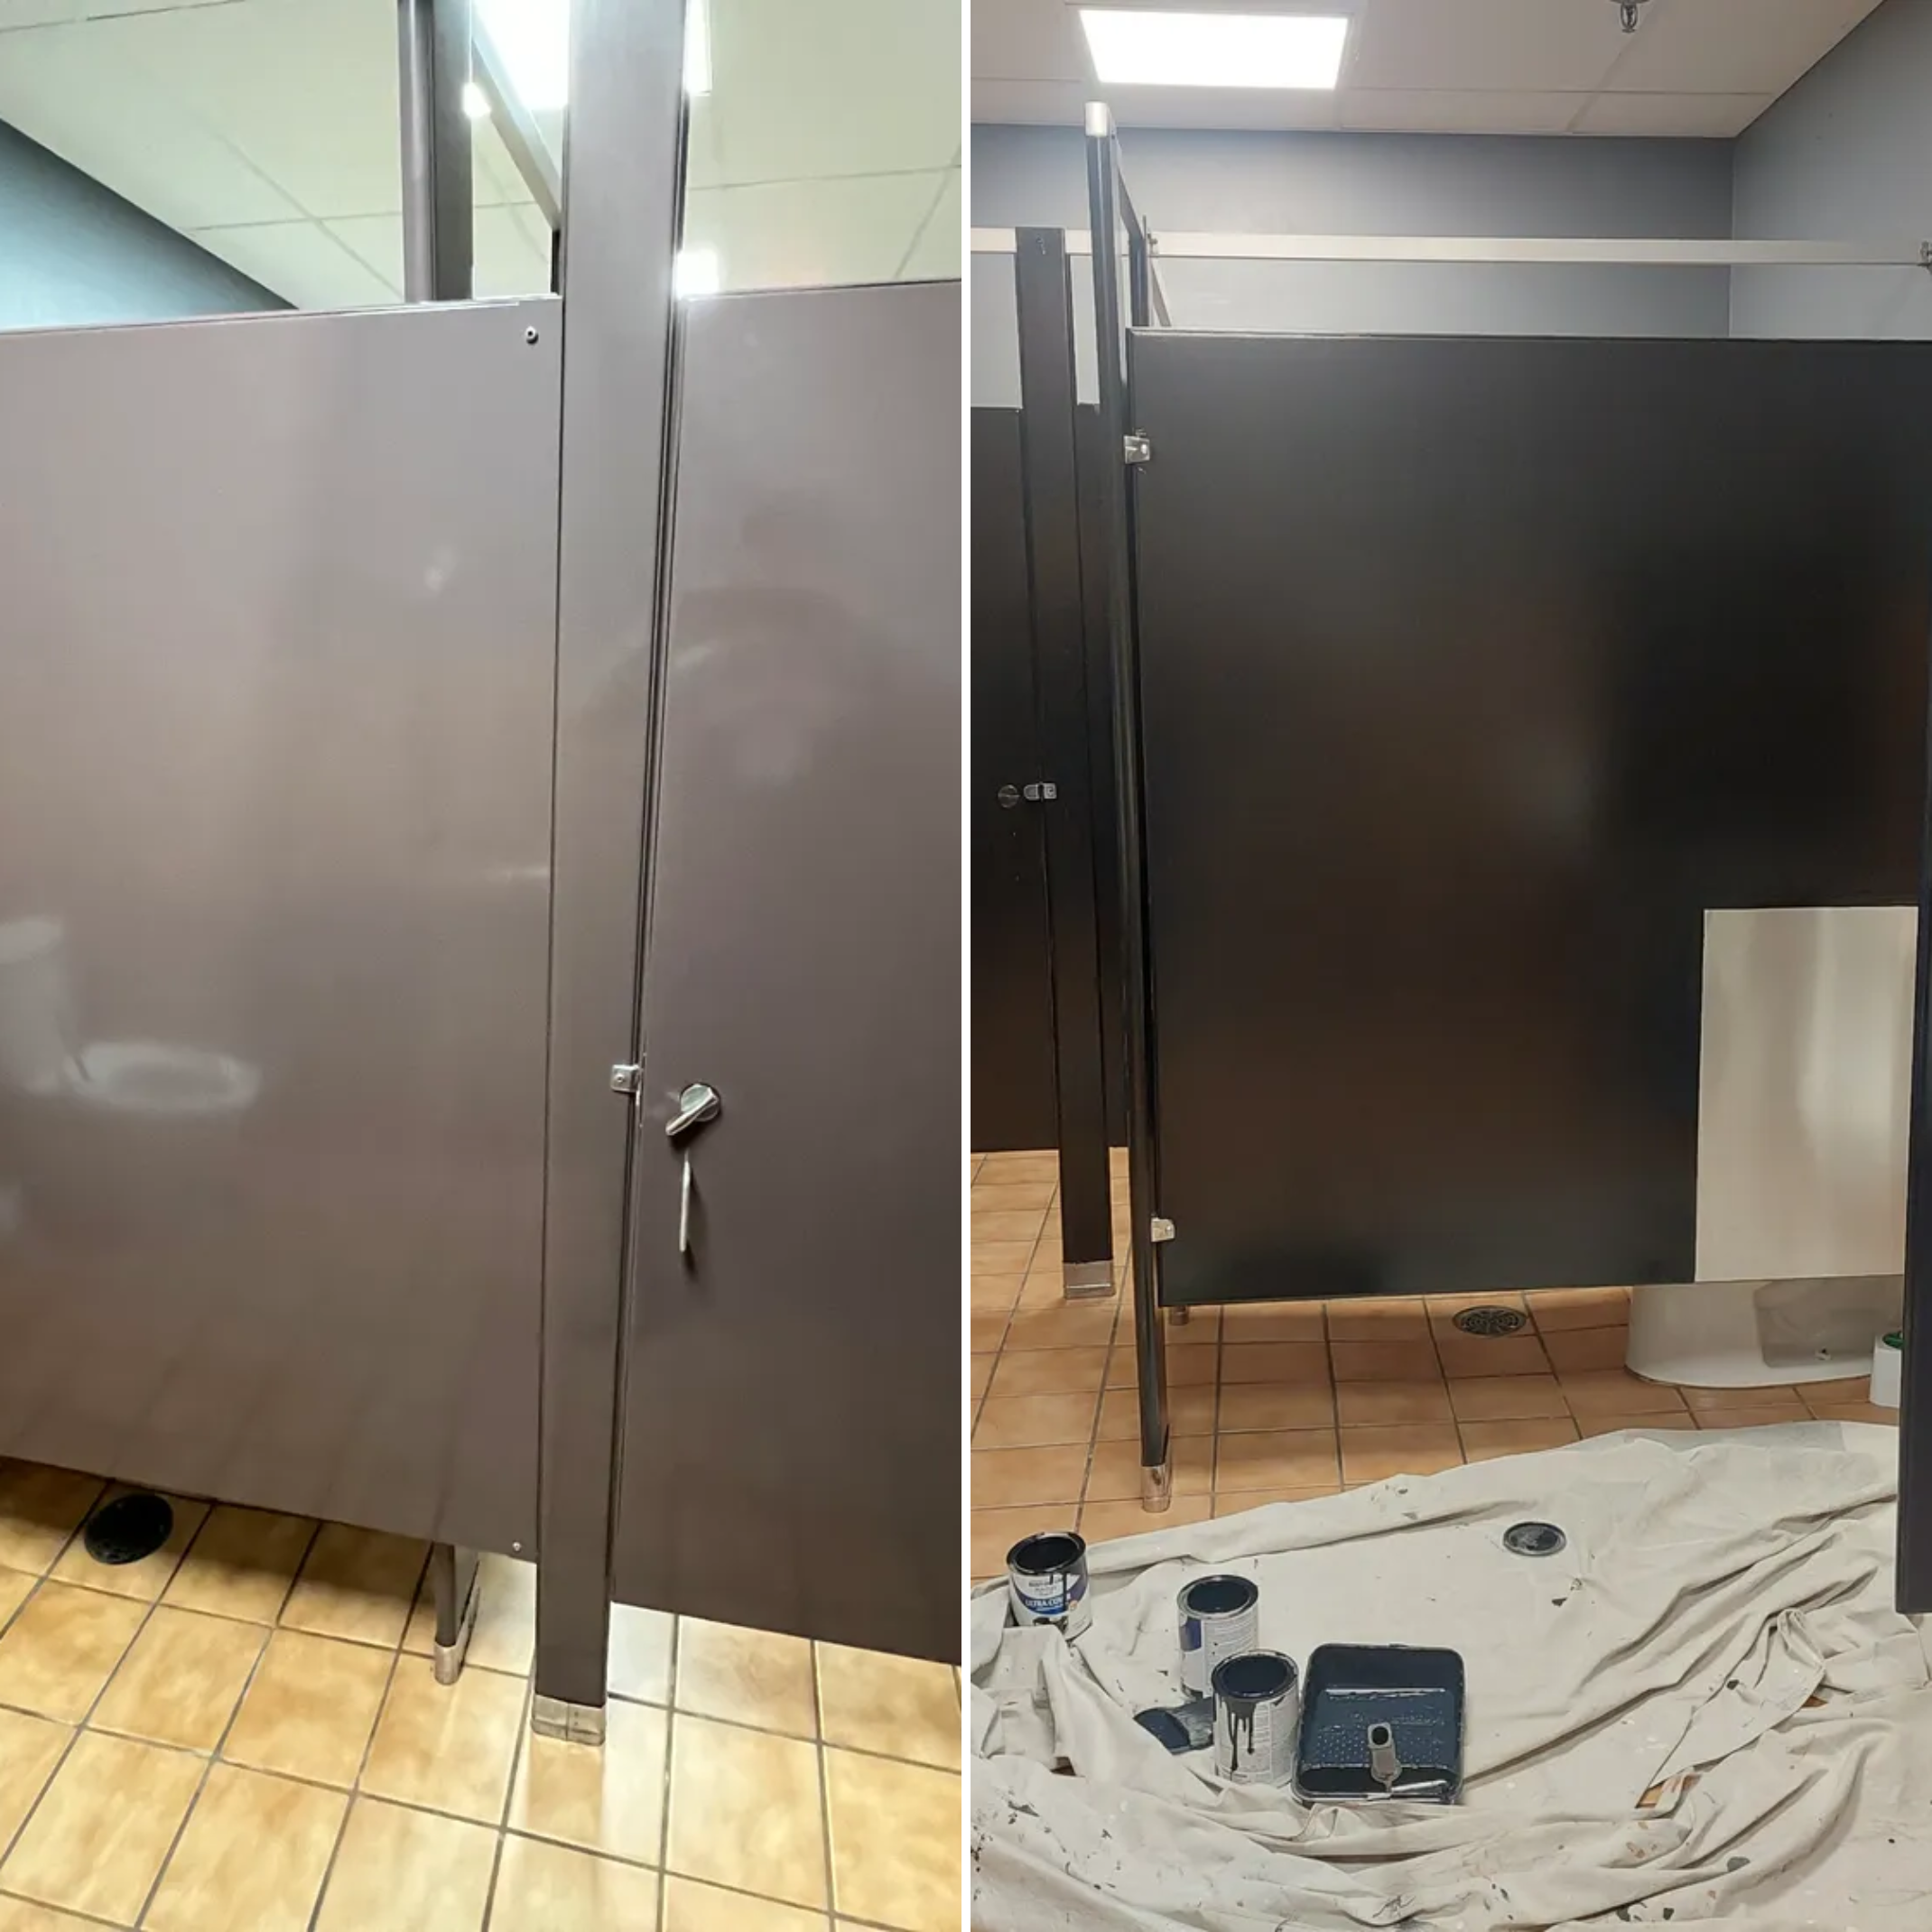 All Photos for Northstar Painting and Sandblasting in Duluth, MN